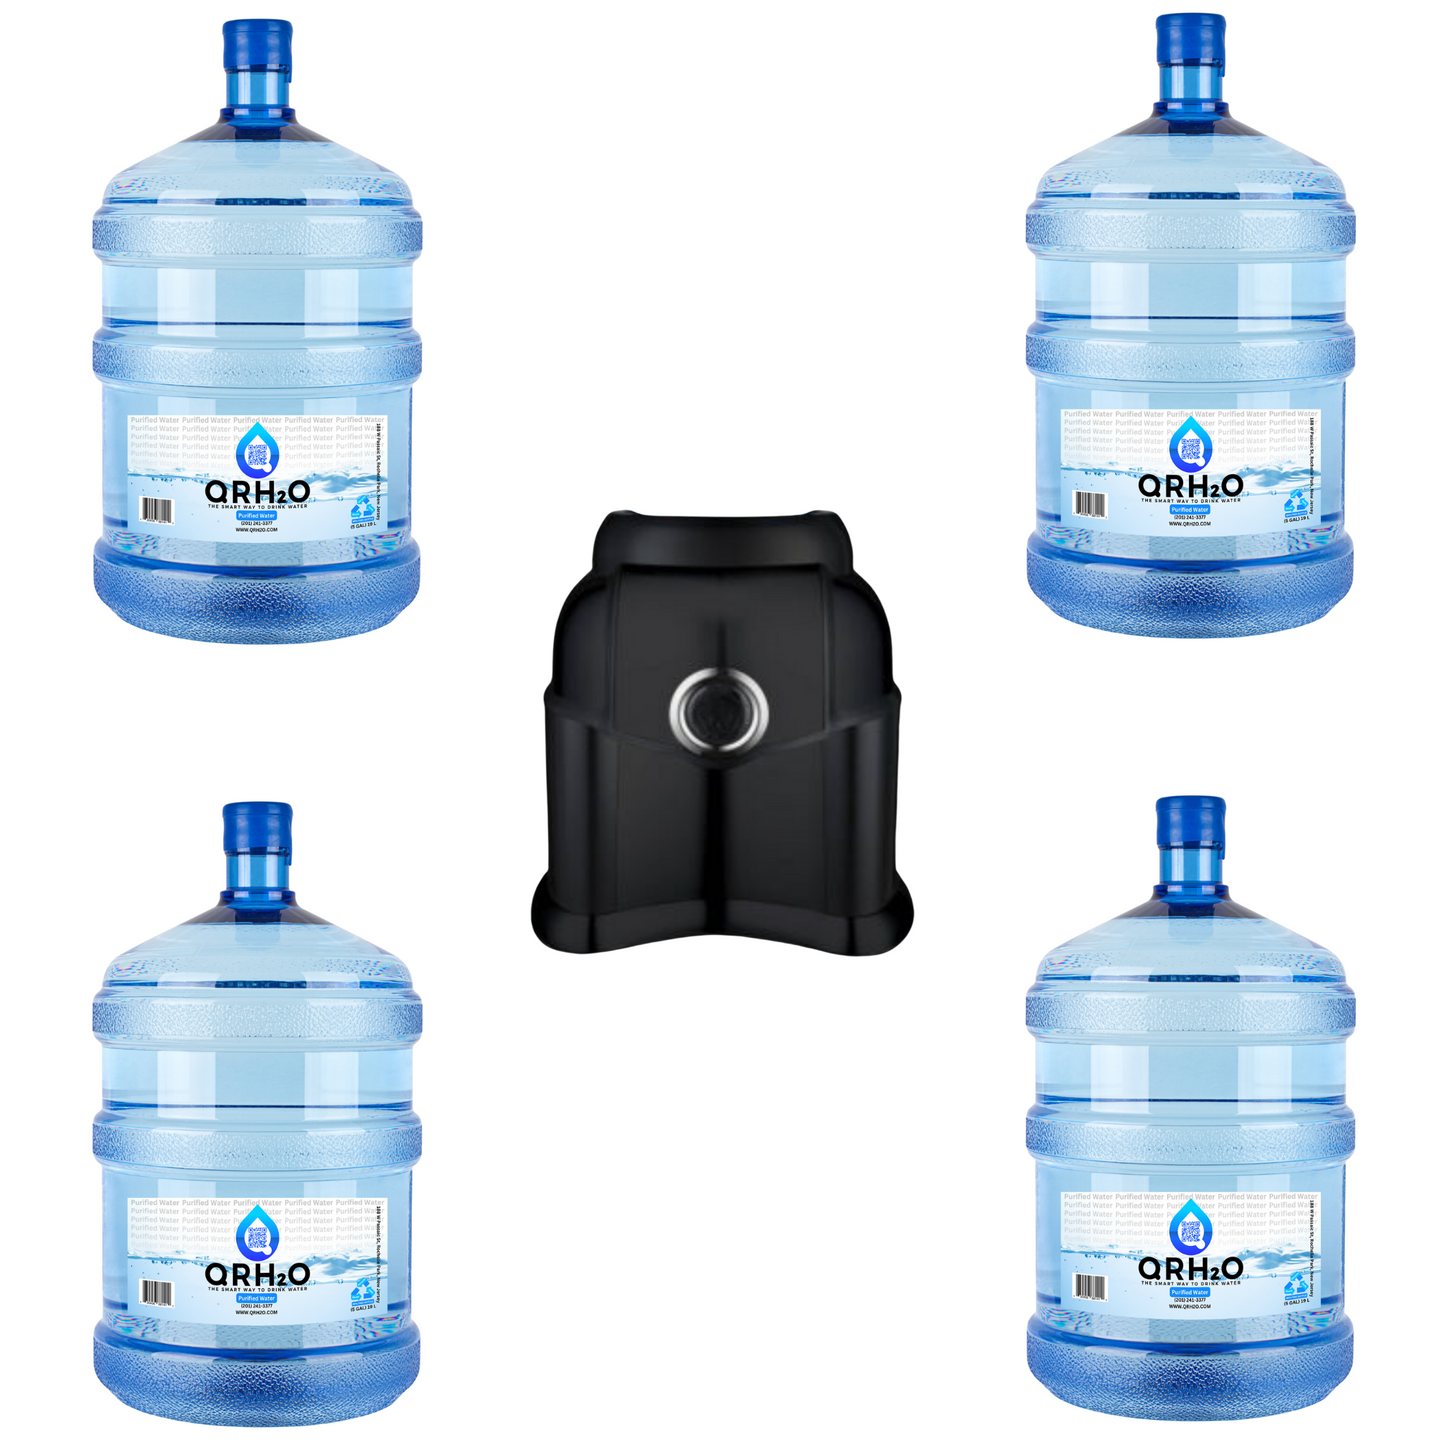 Enjoy refreshing water in your home or office with our 4 5-gallon water bottles and countertop dispenser, featuring a choice of alkaline or purified water at room temperature.